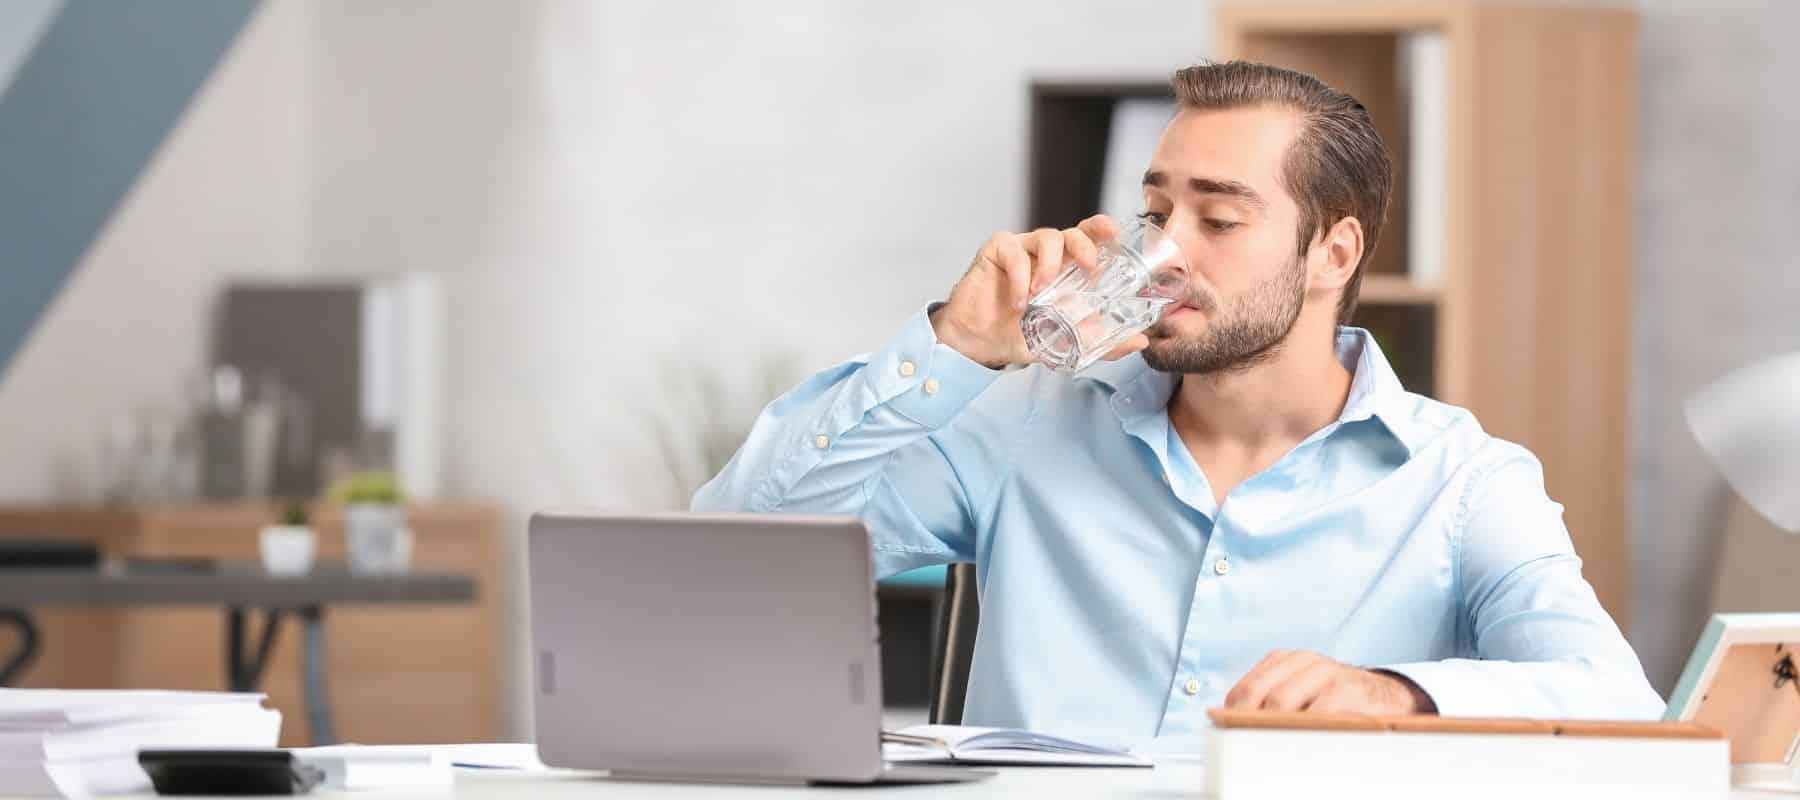 man drinking water out of a glass at his computer